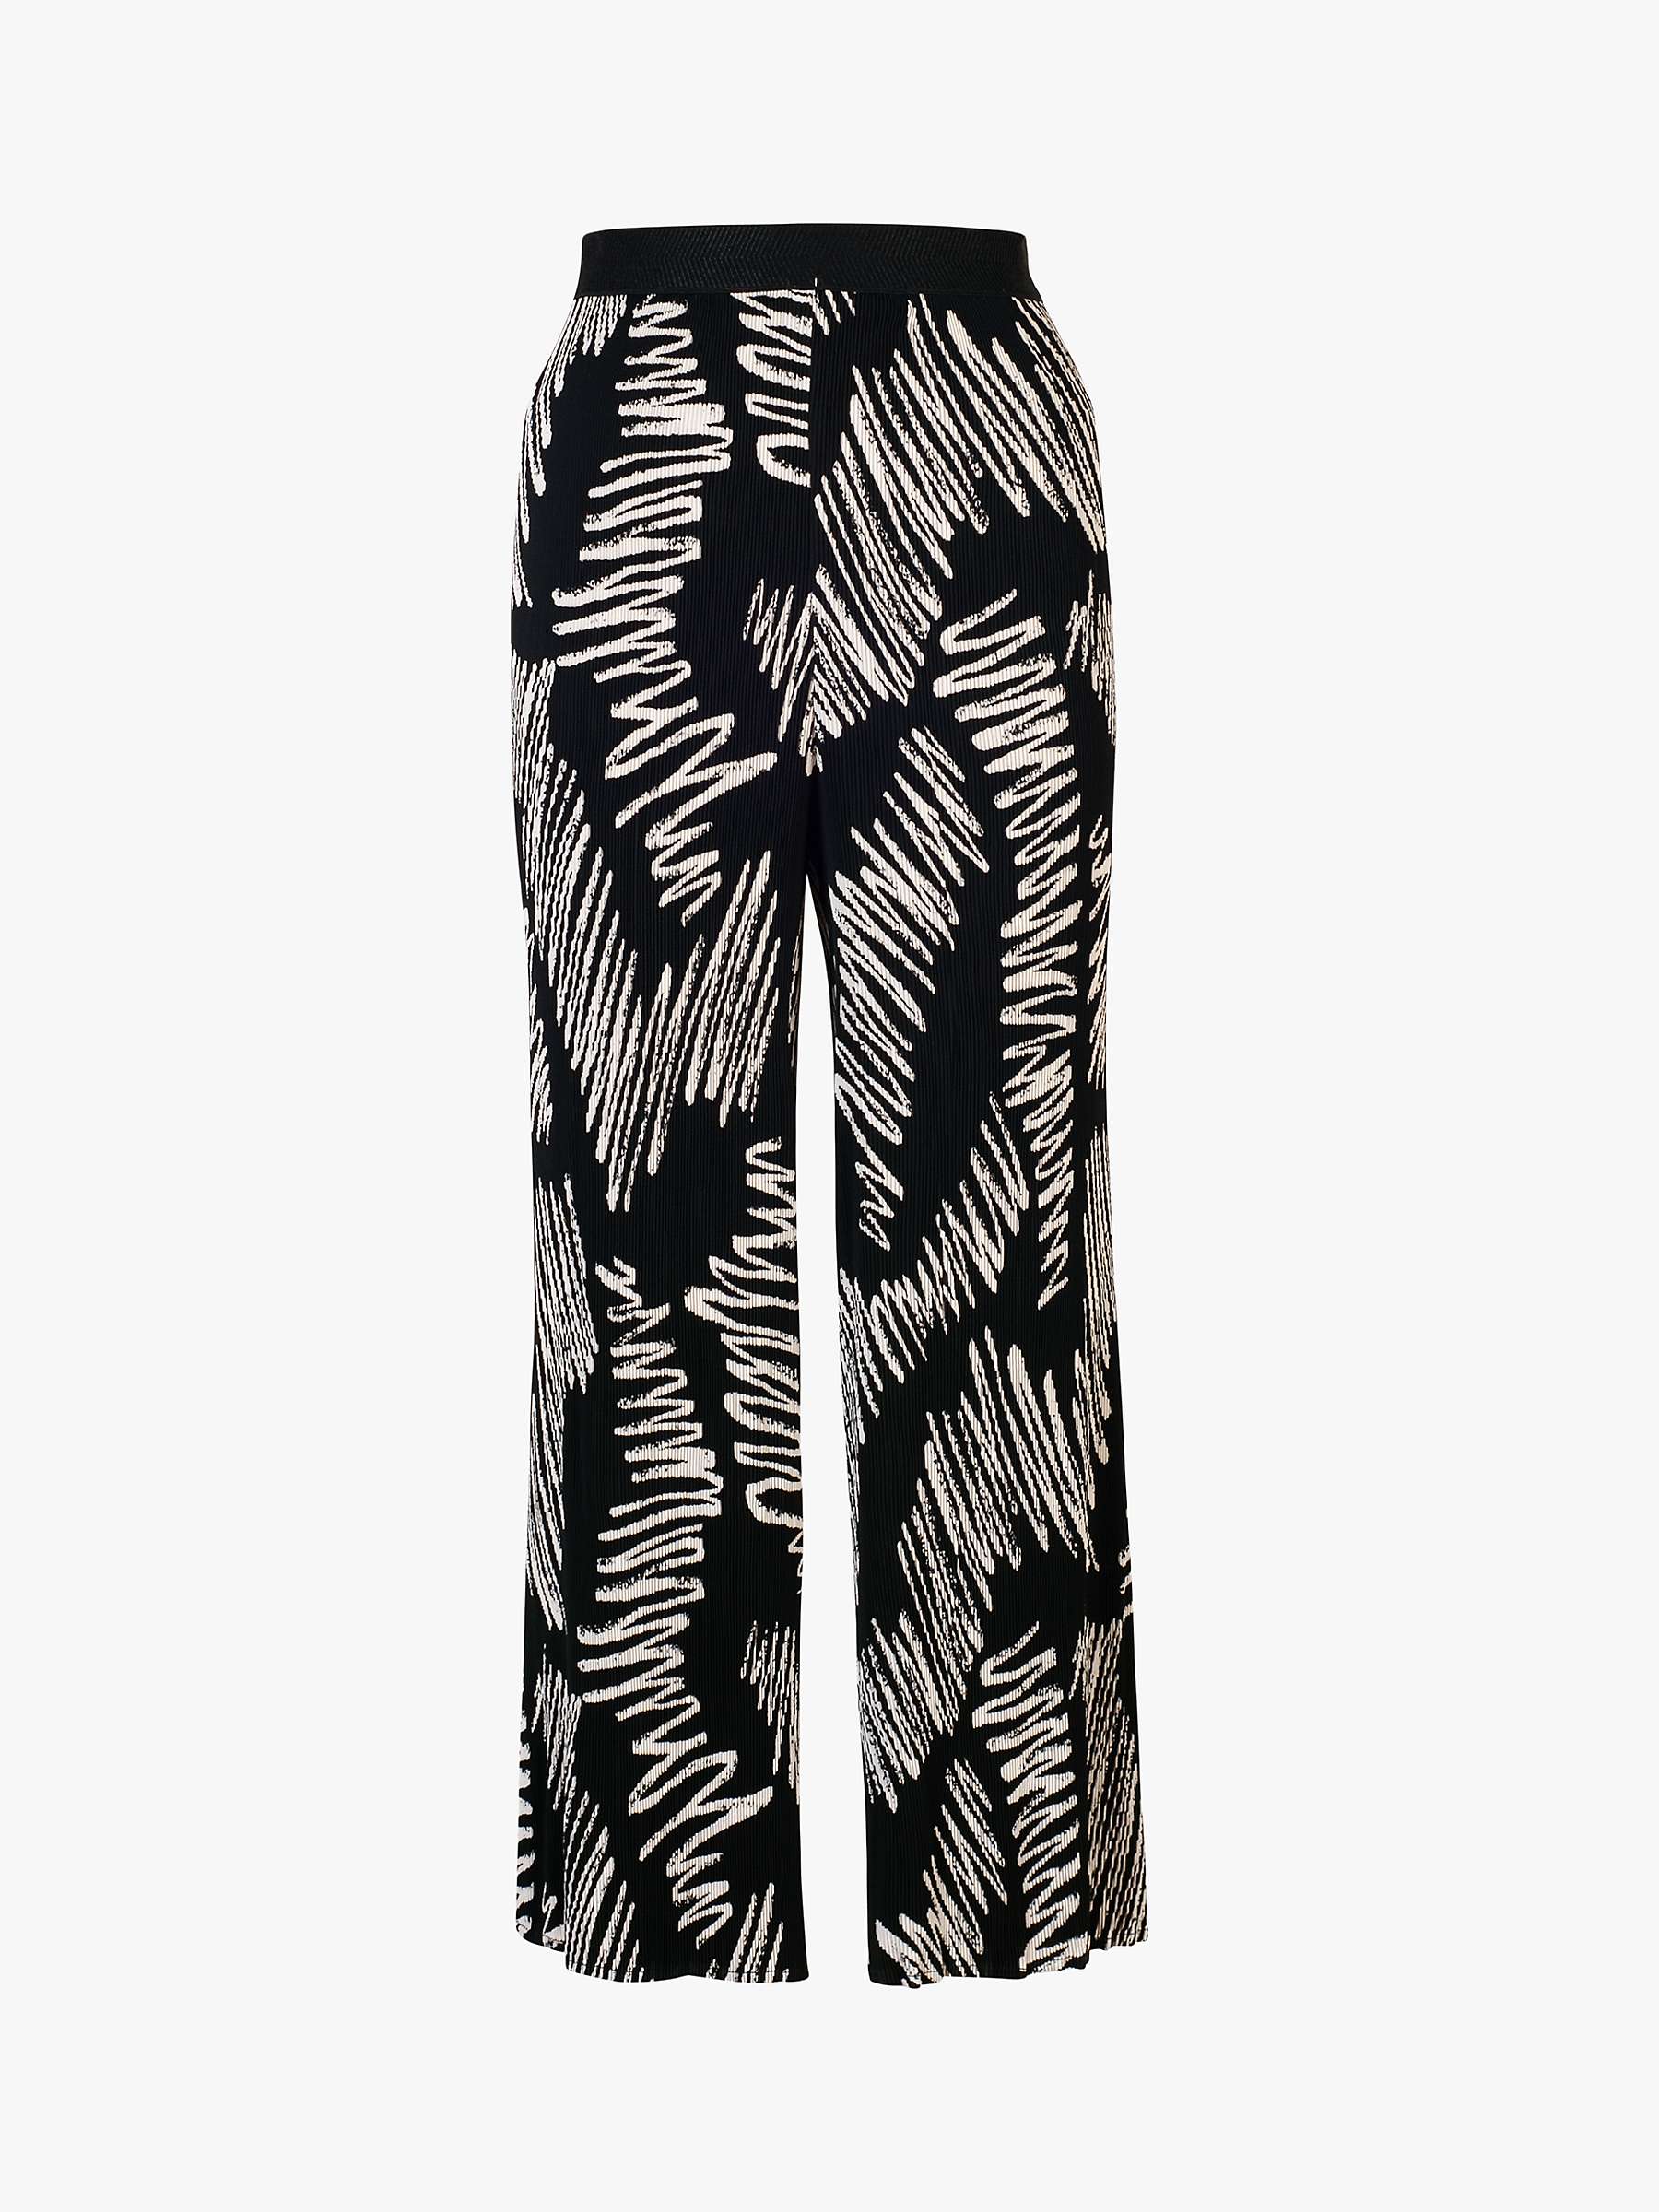 Buy chesca Scribble Print Plisse Trousers, Black/White Online at johnlewis.com